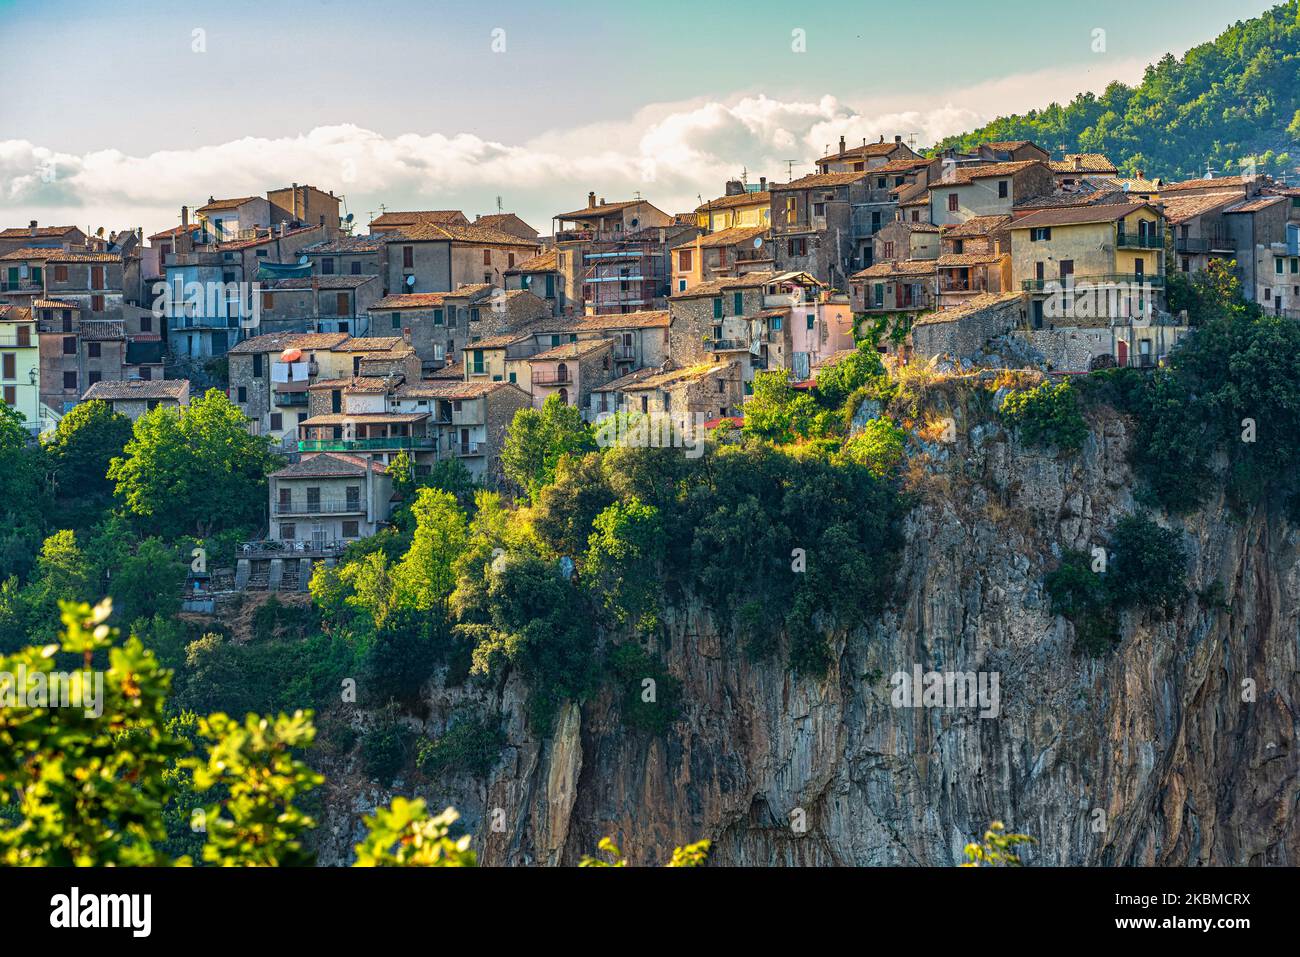 The dominant position of the town on the Aniene valley of the medieval village of Jenne. Jenne, Rome province, Lazio, Italy, Europe Stock Photo